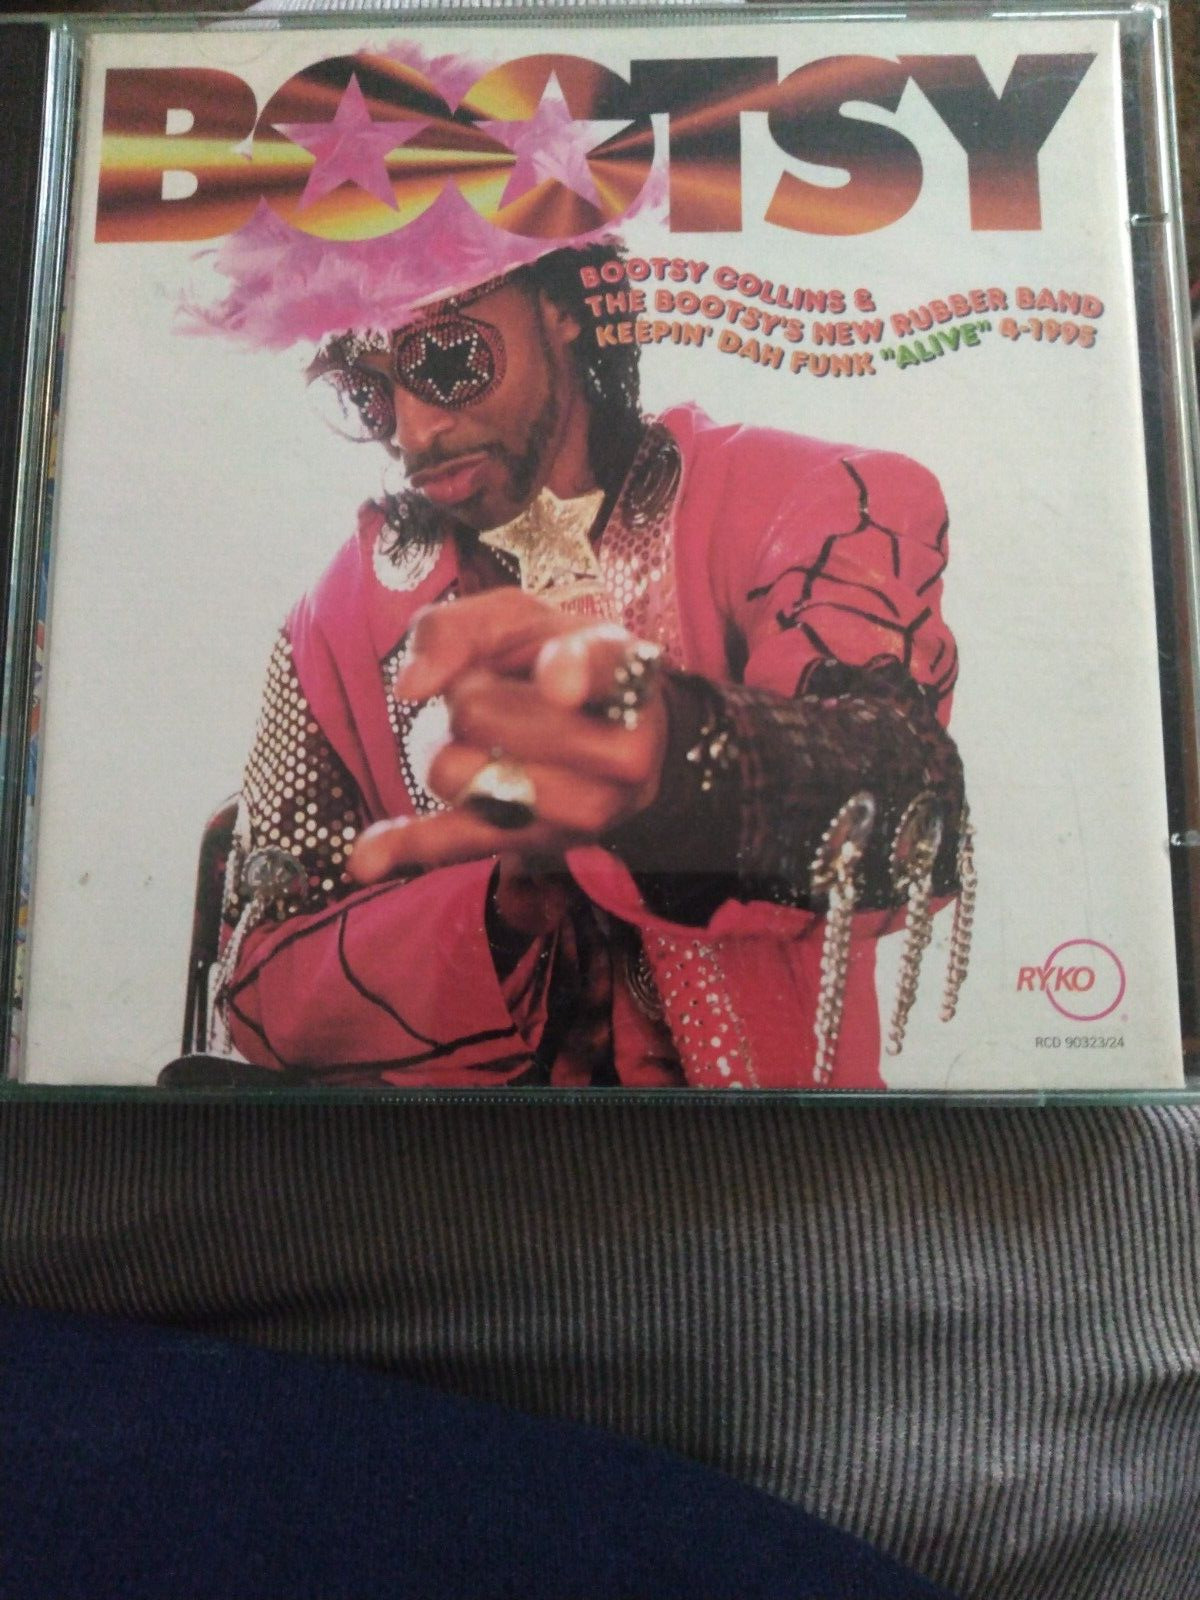 Bootsy Collins - Keepin' Dah Funk Alive 4 - 2 CD  Used Cd